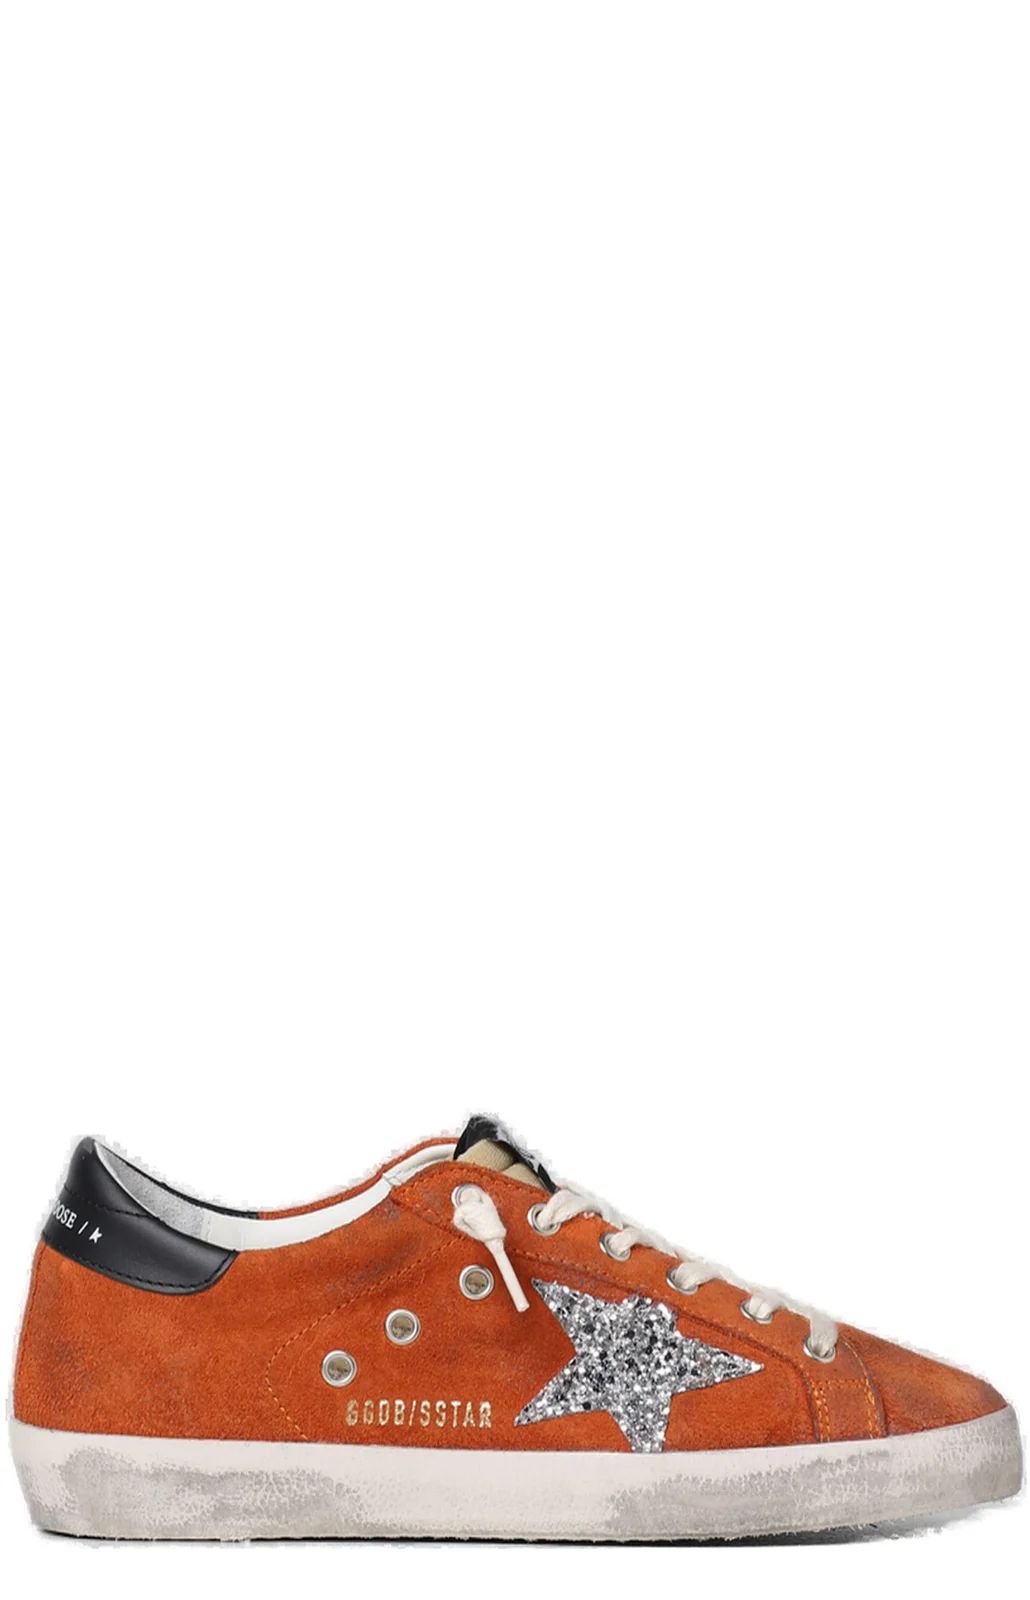 Golden Goose Deluxe Brand Super Star Logo Patch Sneakers | Cettire Global